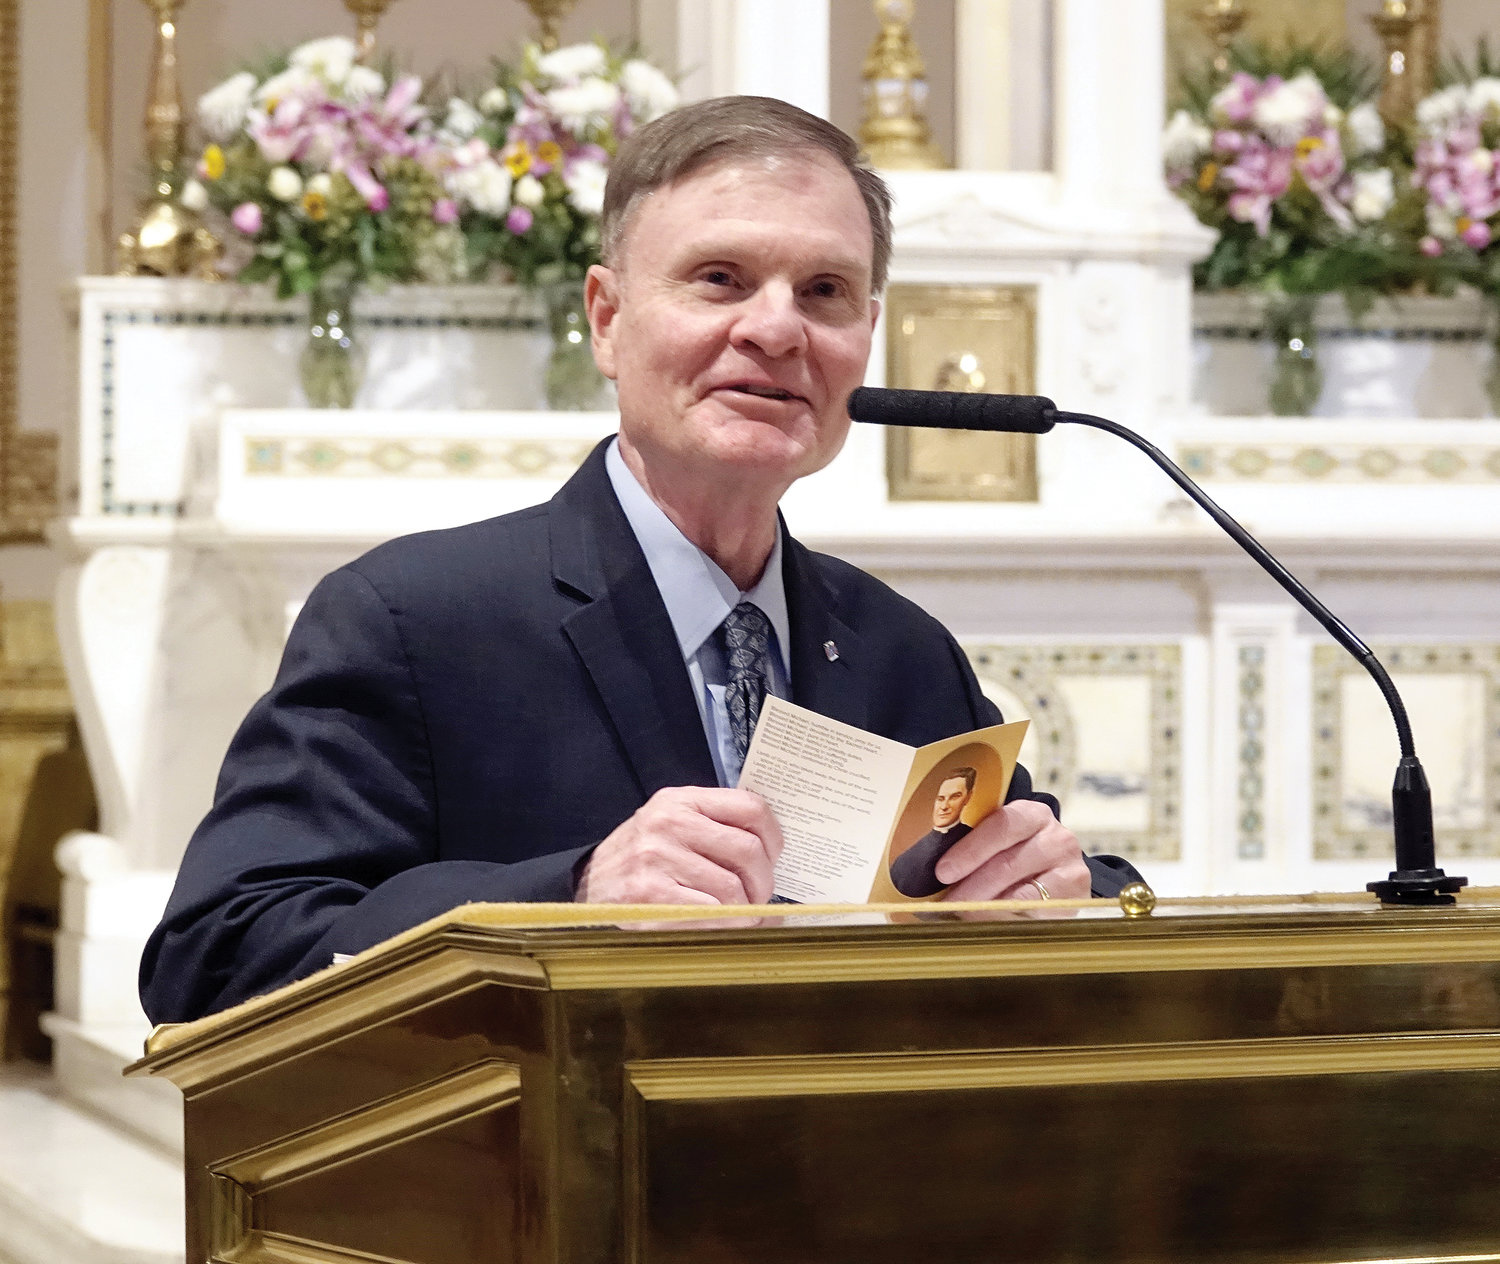 Brian Caulfield, vice postulator for the canonization cause of Blessed Michael McGivney, the Connecticut priest who founded the Knights of Columbus, delivers an April 28 address about Blessed McGivney at St. Joseph’s Seminary, Dunwoodie.